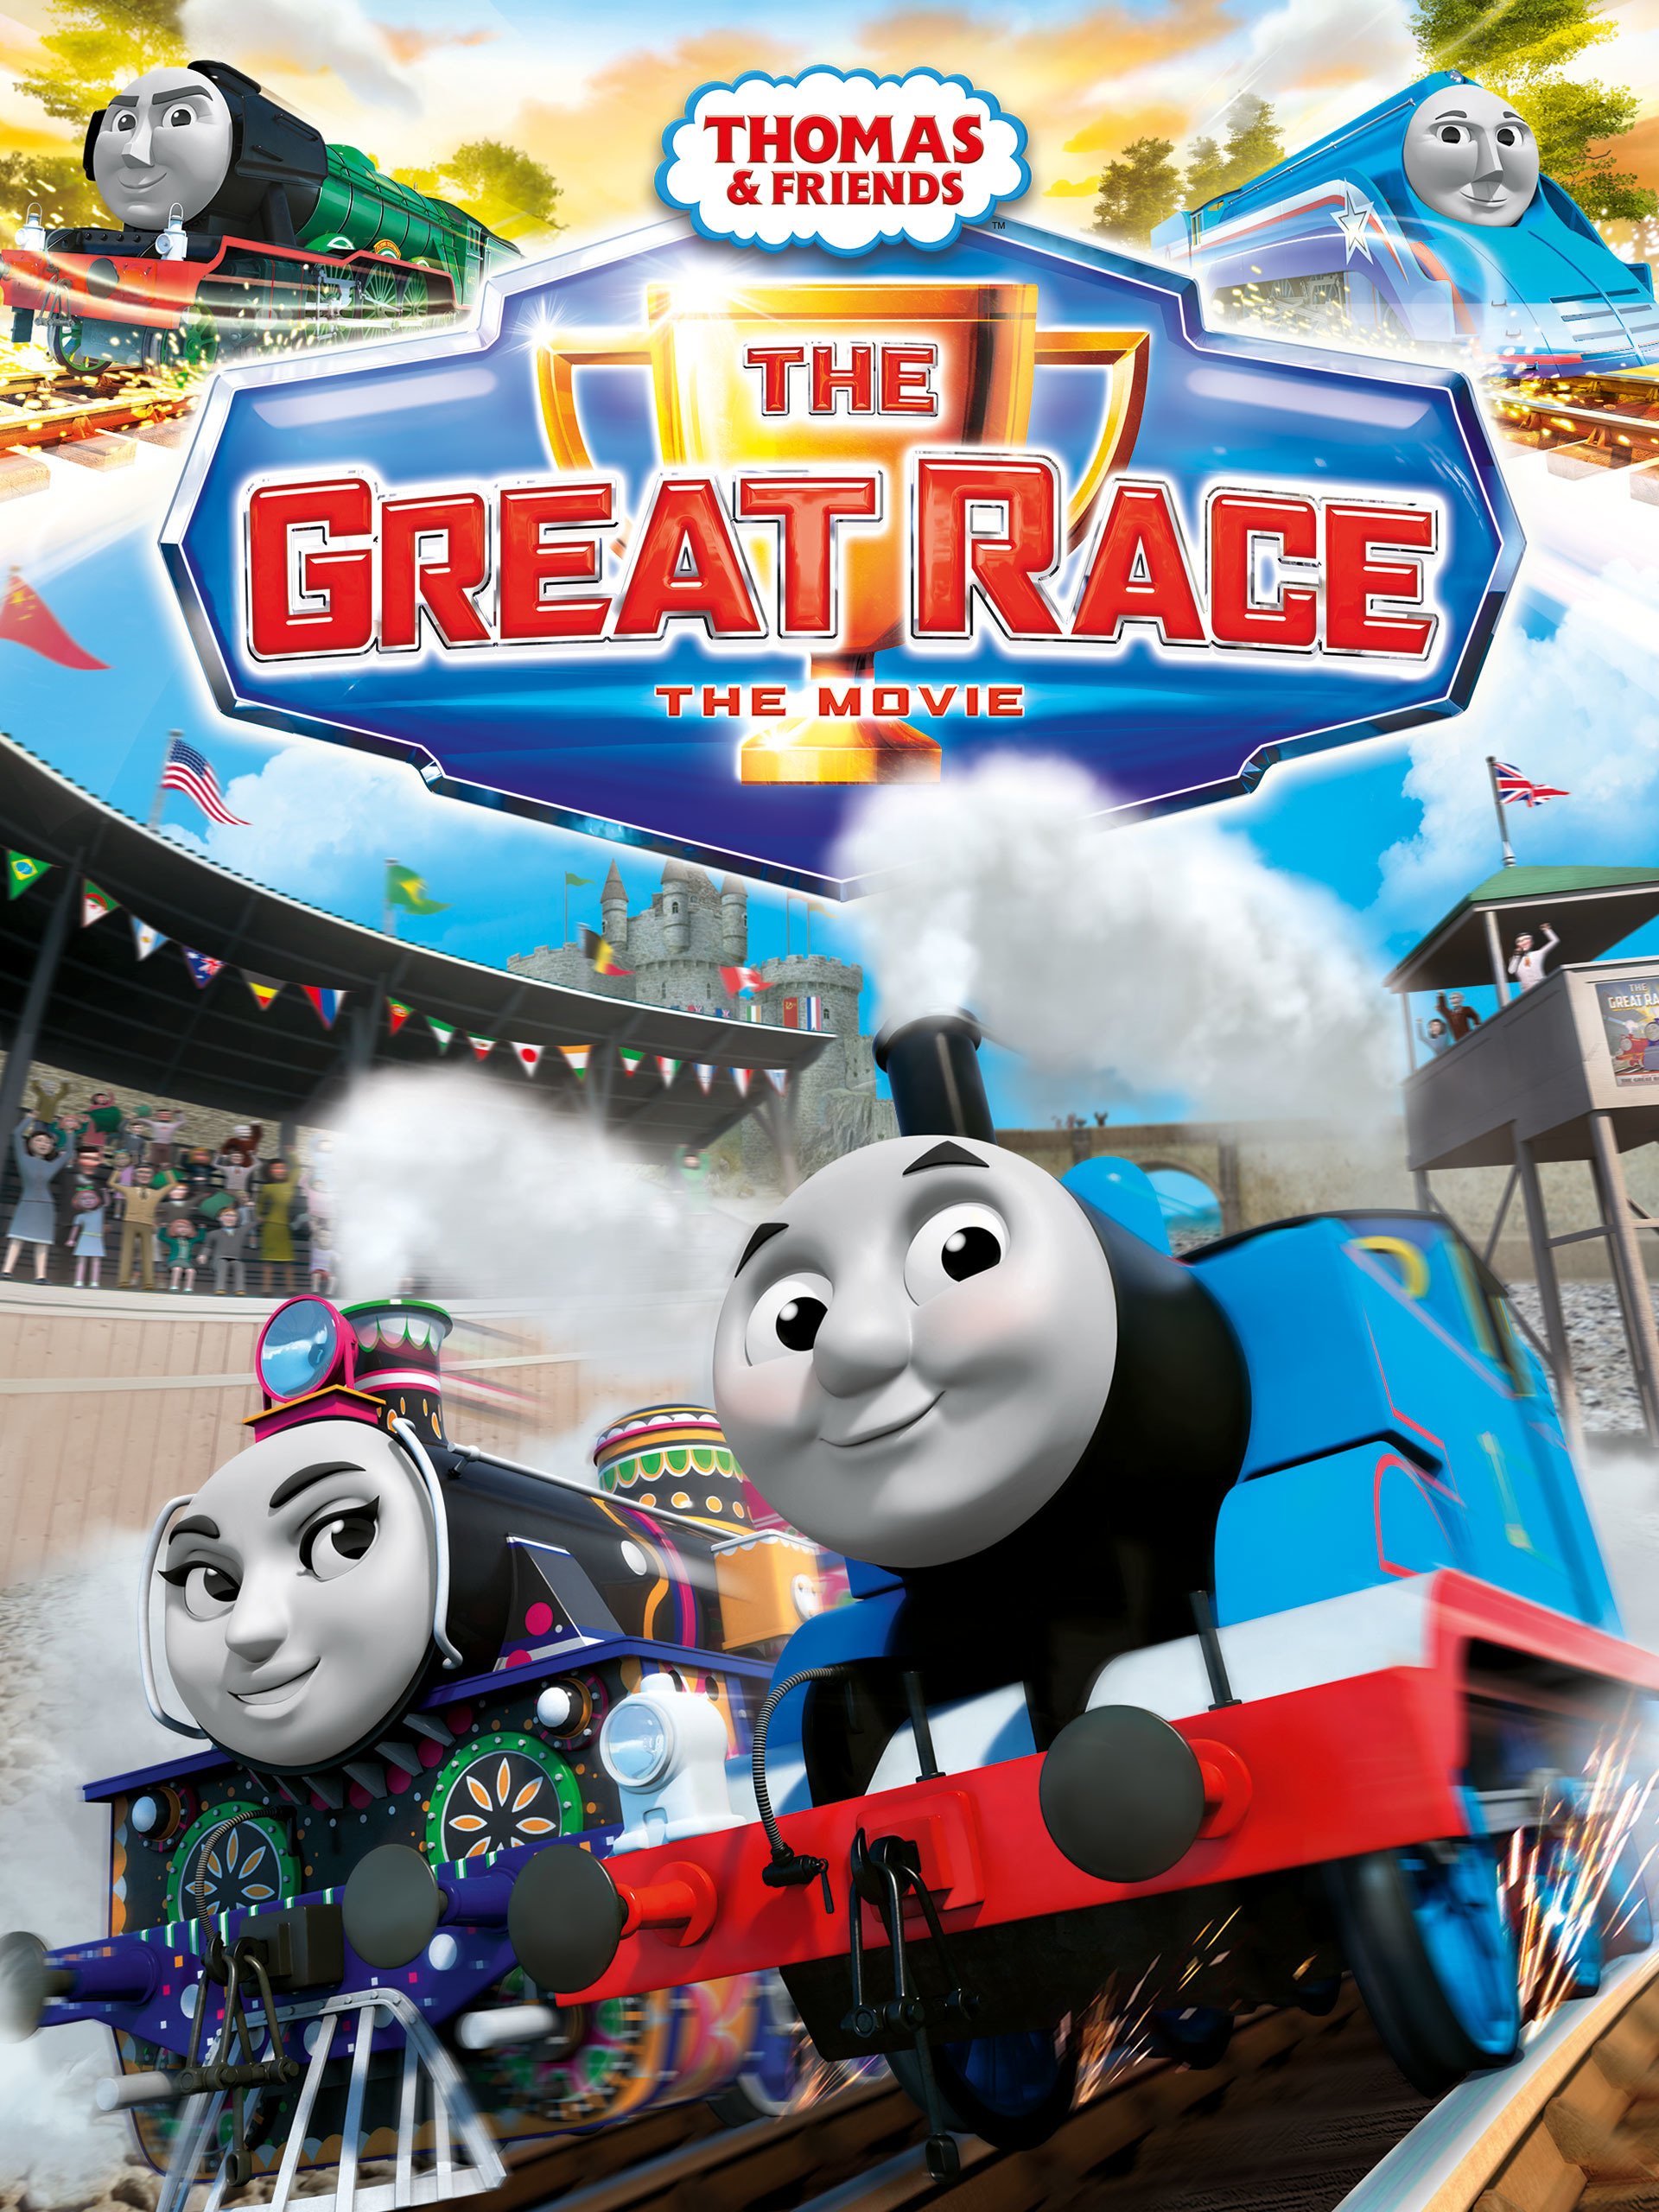 The Great Race | Thomas the Tank Engine 